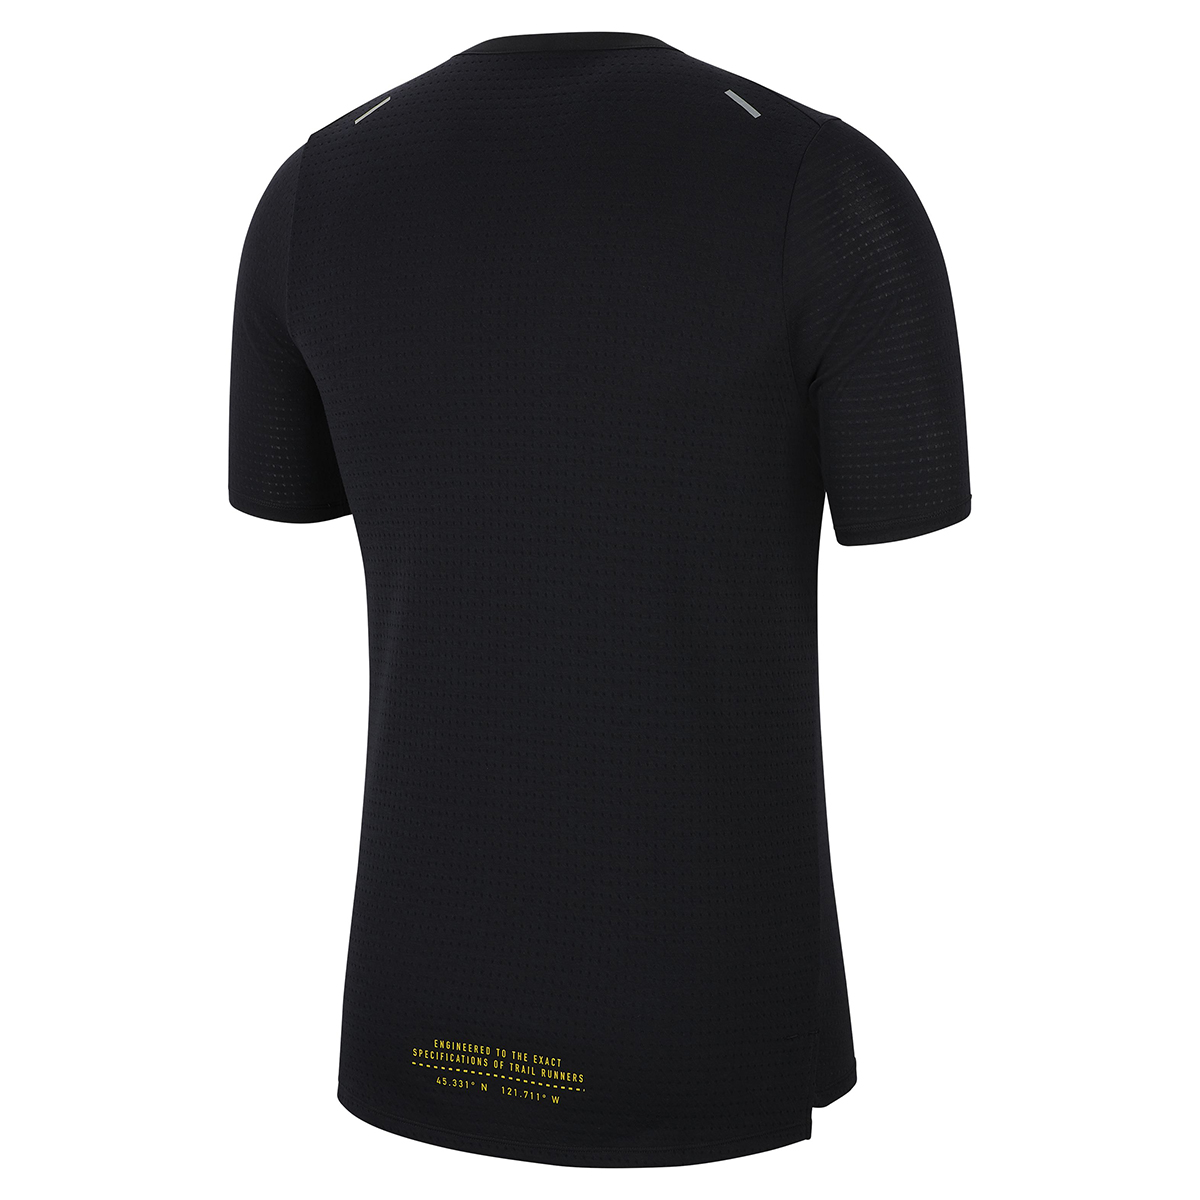 Remera Nike Rise 365 Trail,  image number null